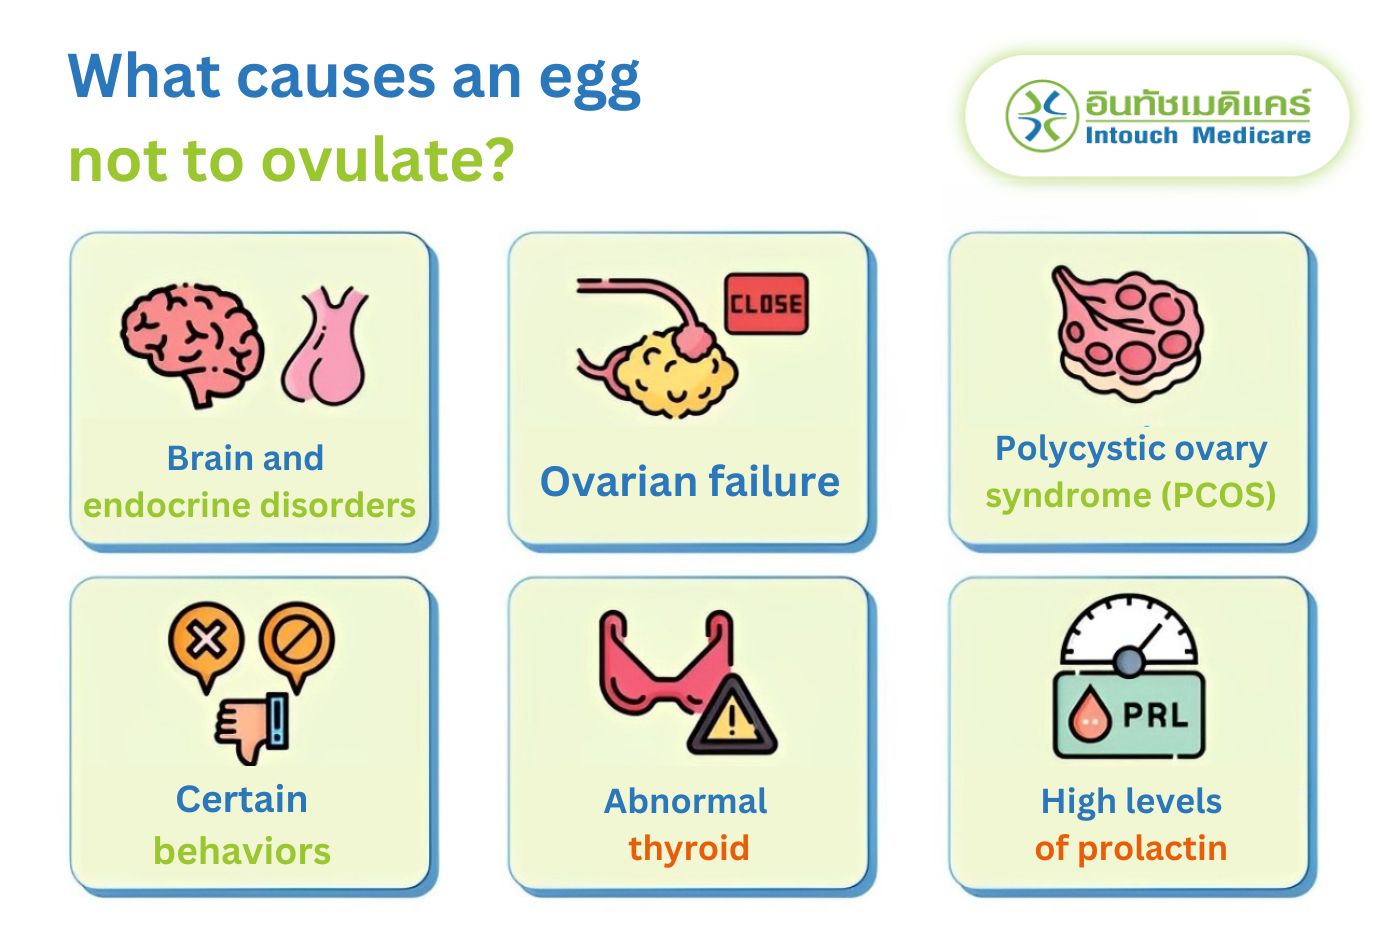 What causes an egg not to ovulate